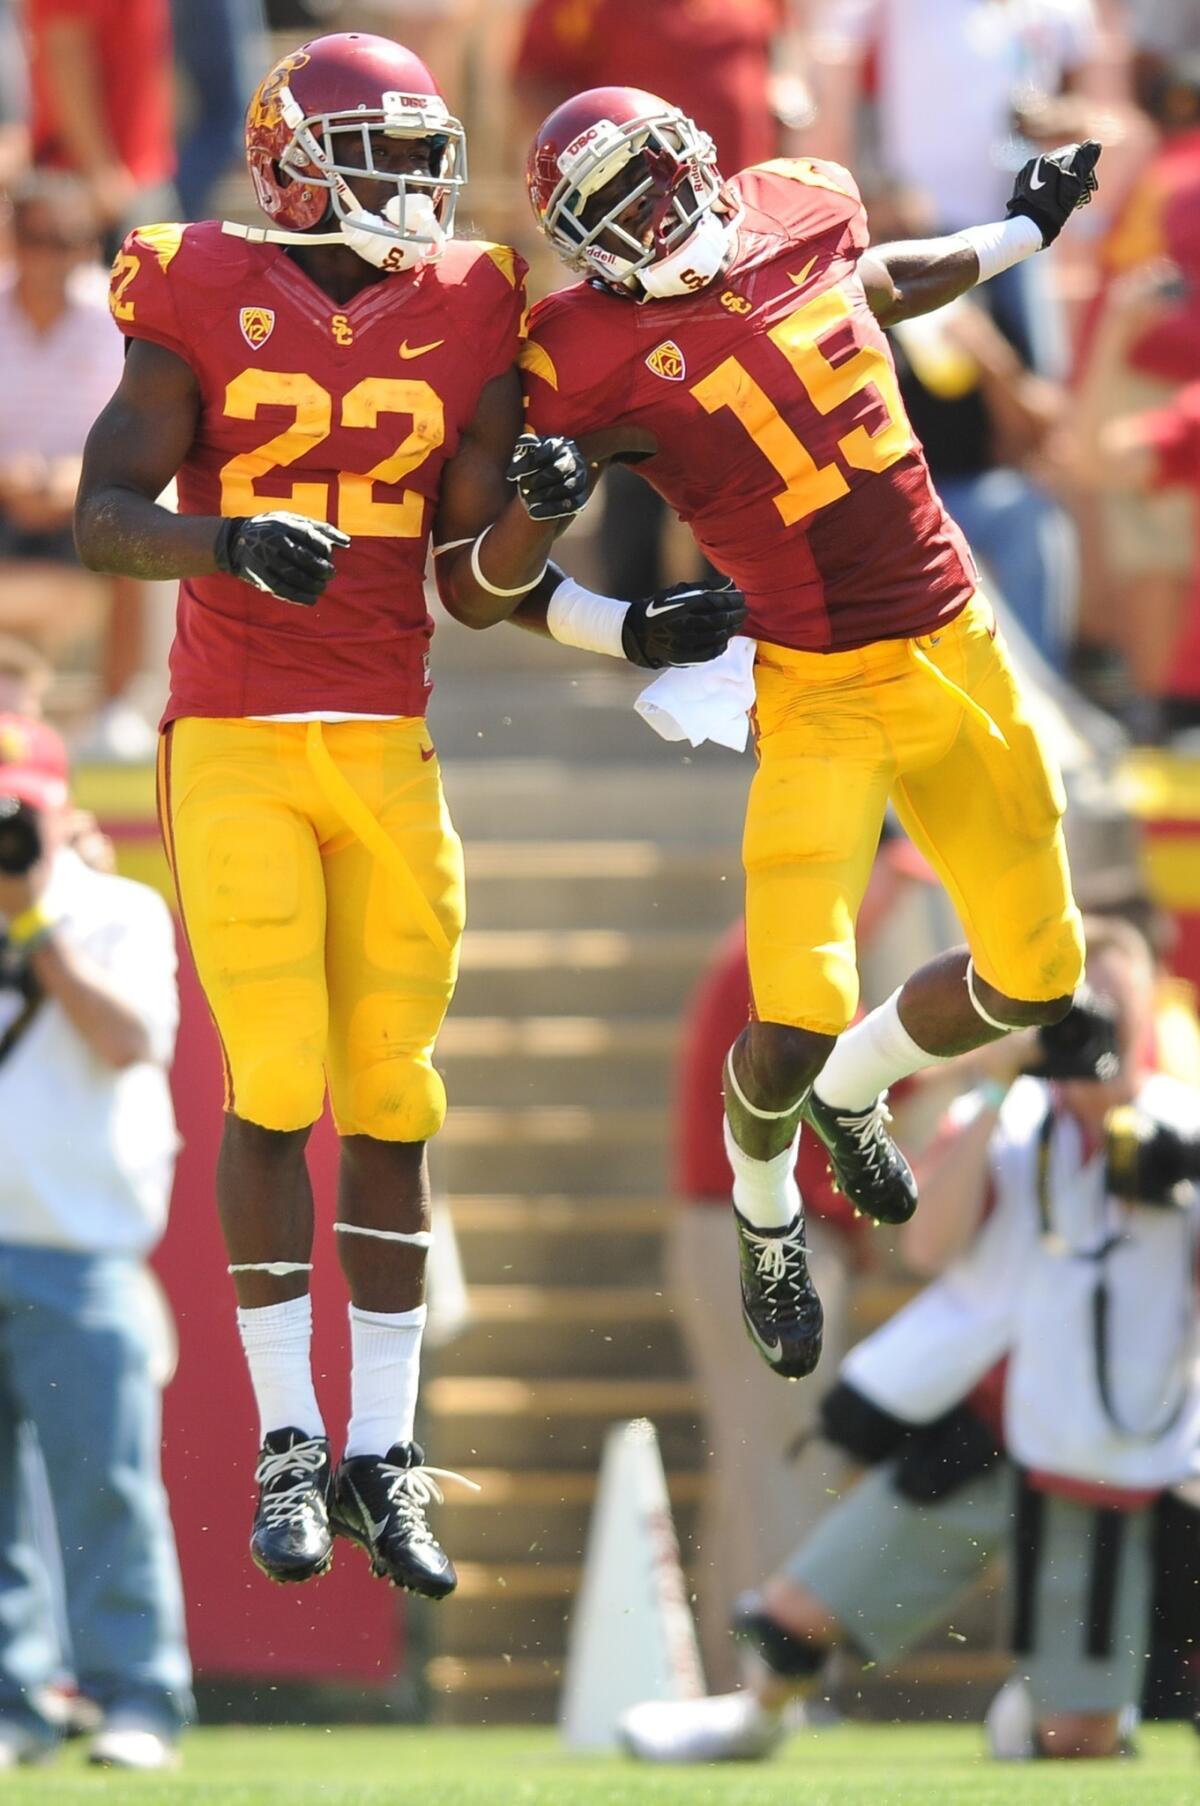 USC running back Justin Davis, left, celebrates with teammate Nelson Agholor after scoring a touchdown in Saturday's 35-7 win over Boston College.